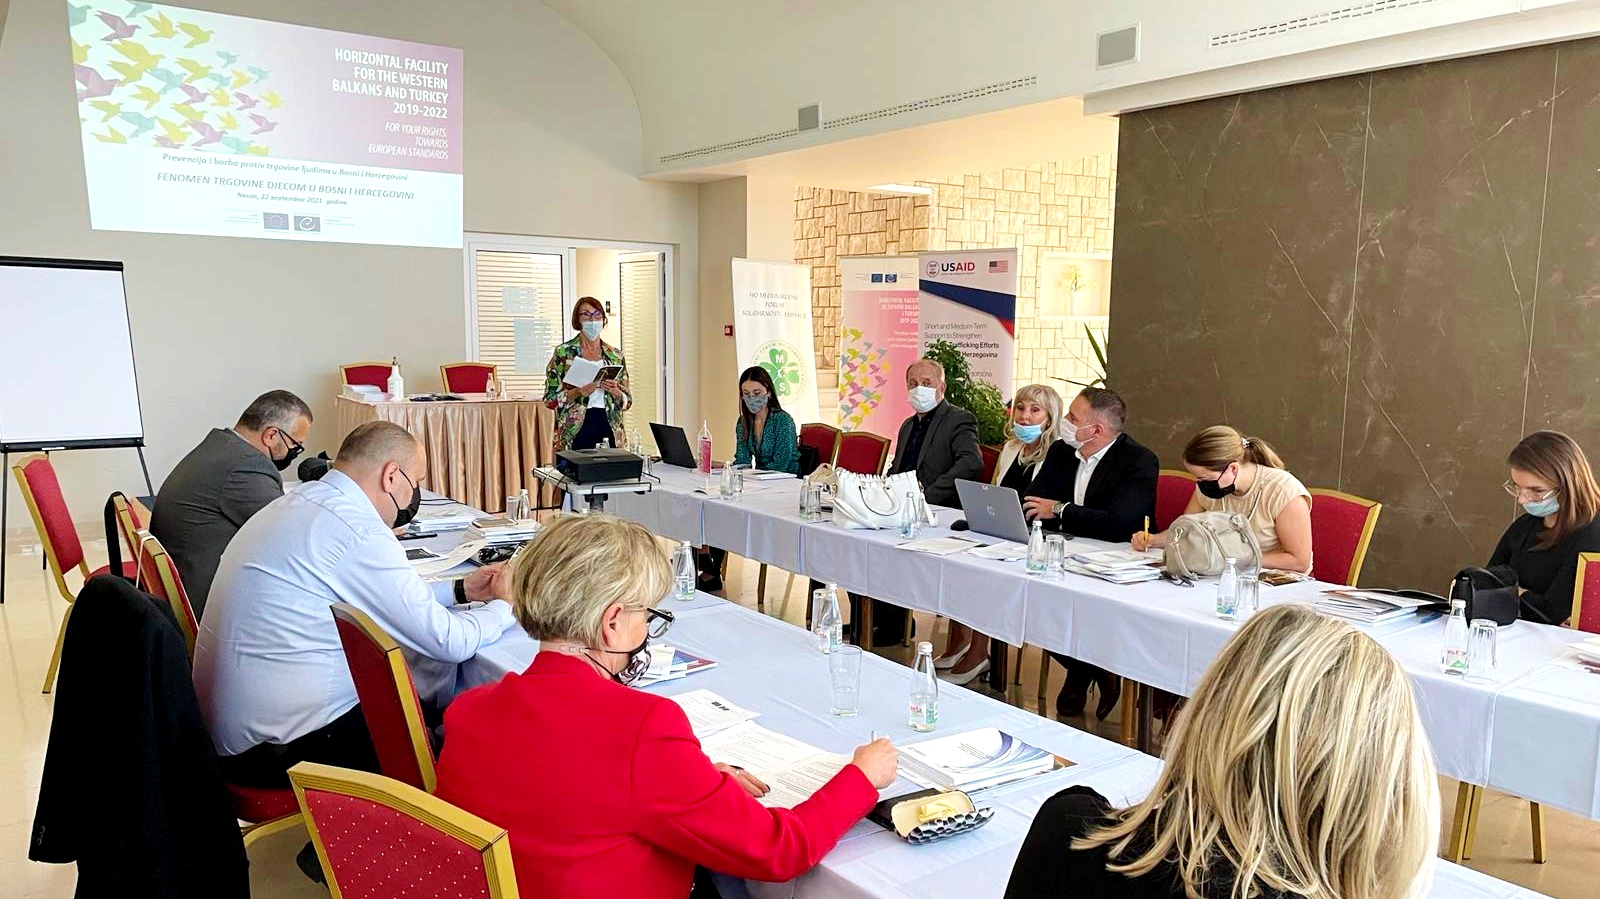 Enhancement of capacities of legal professionals through training on child trafficking organised within XIV Annual Symposium for Prosecutors in Neum